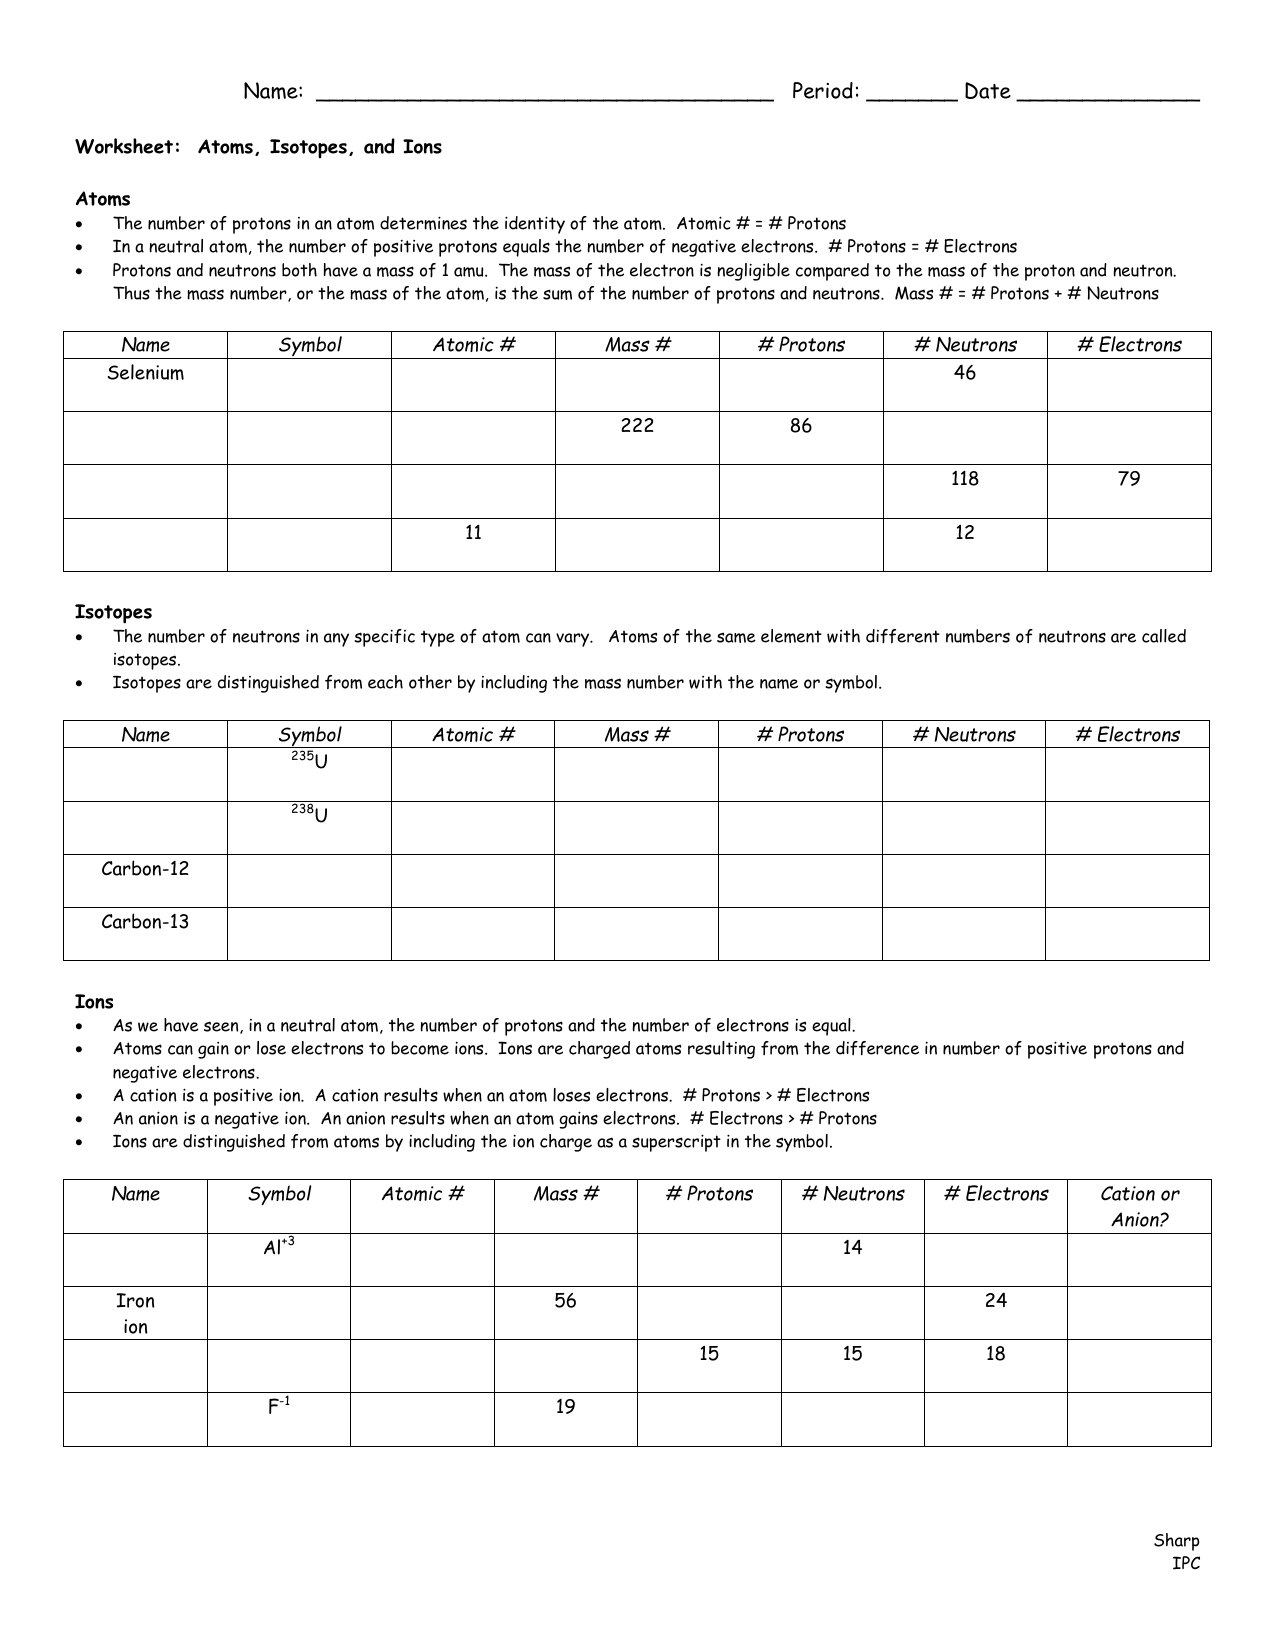 Atoms, Isotopes, & Ions Worksheet Throughout Atoms And Isotopes Worksheet Answers